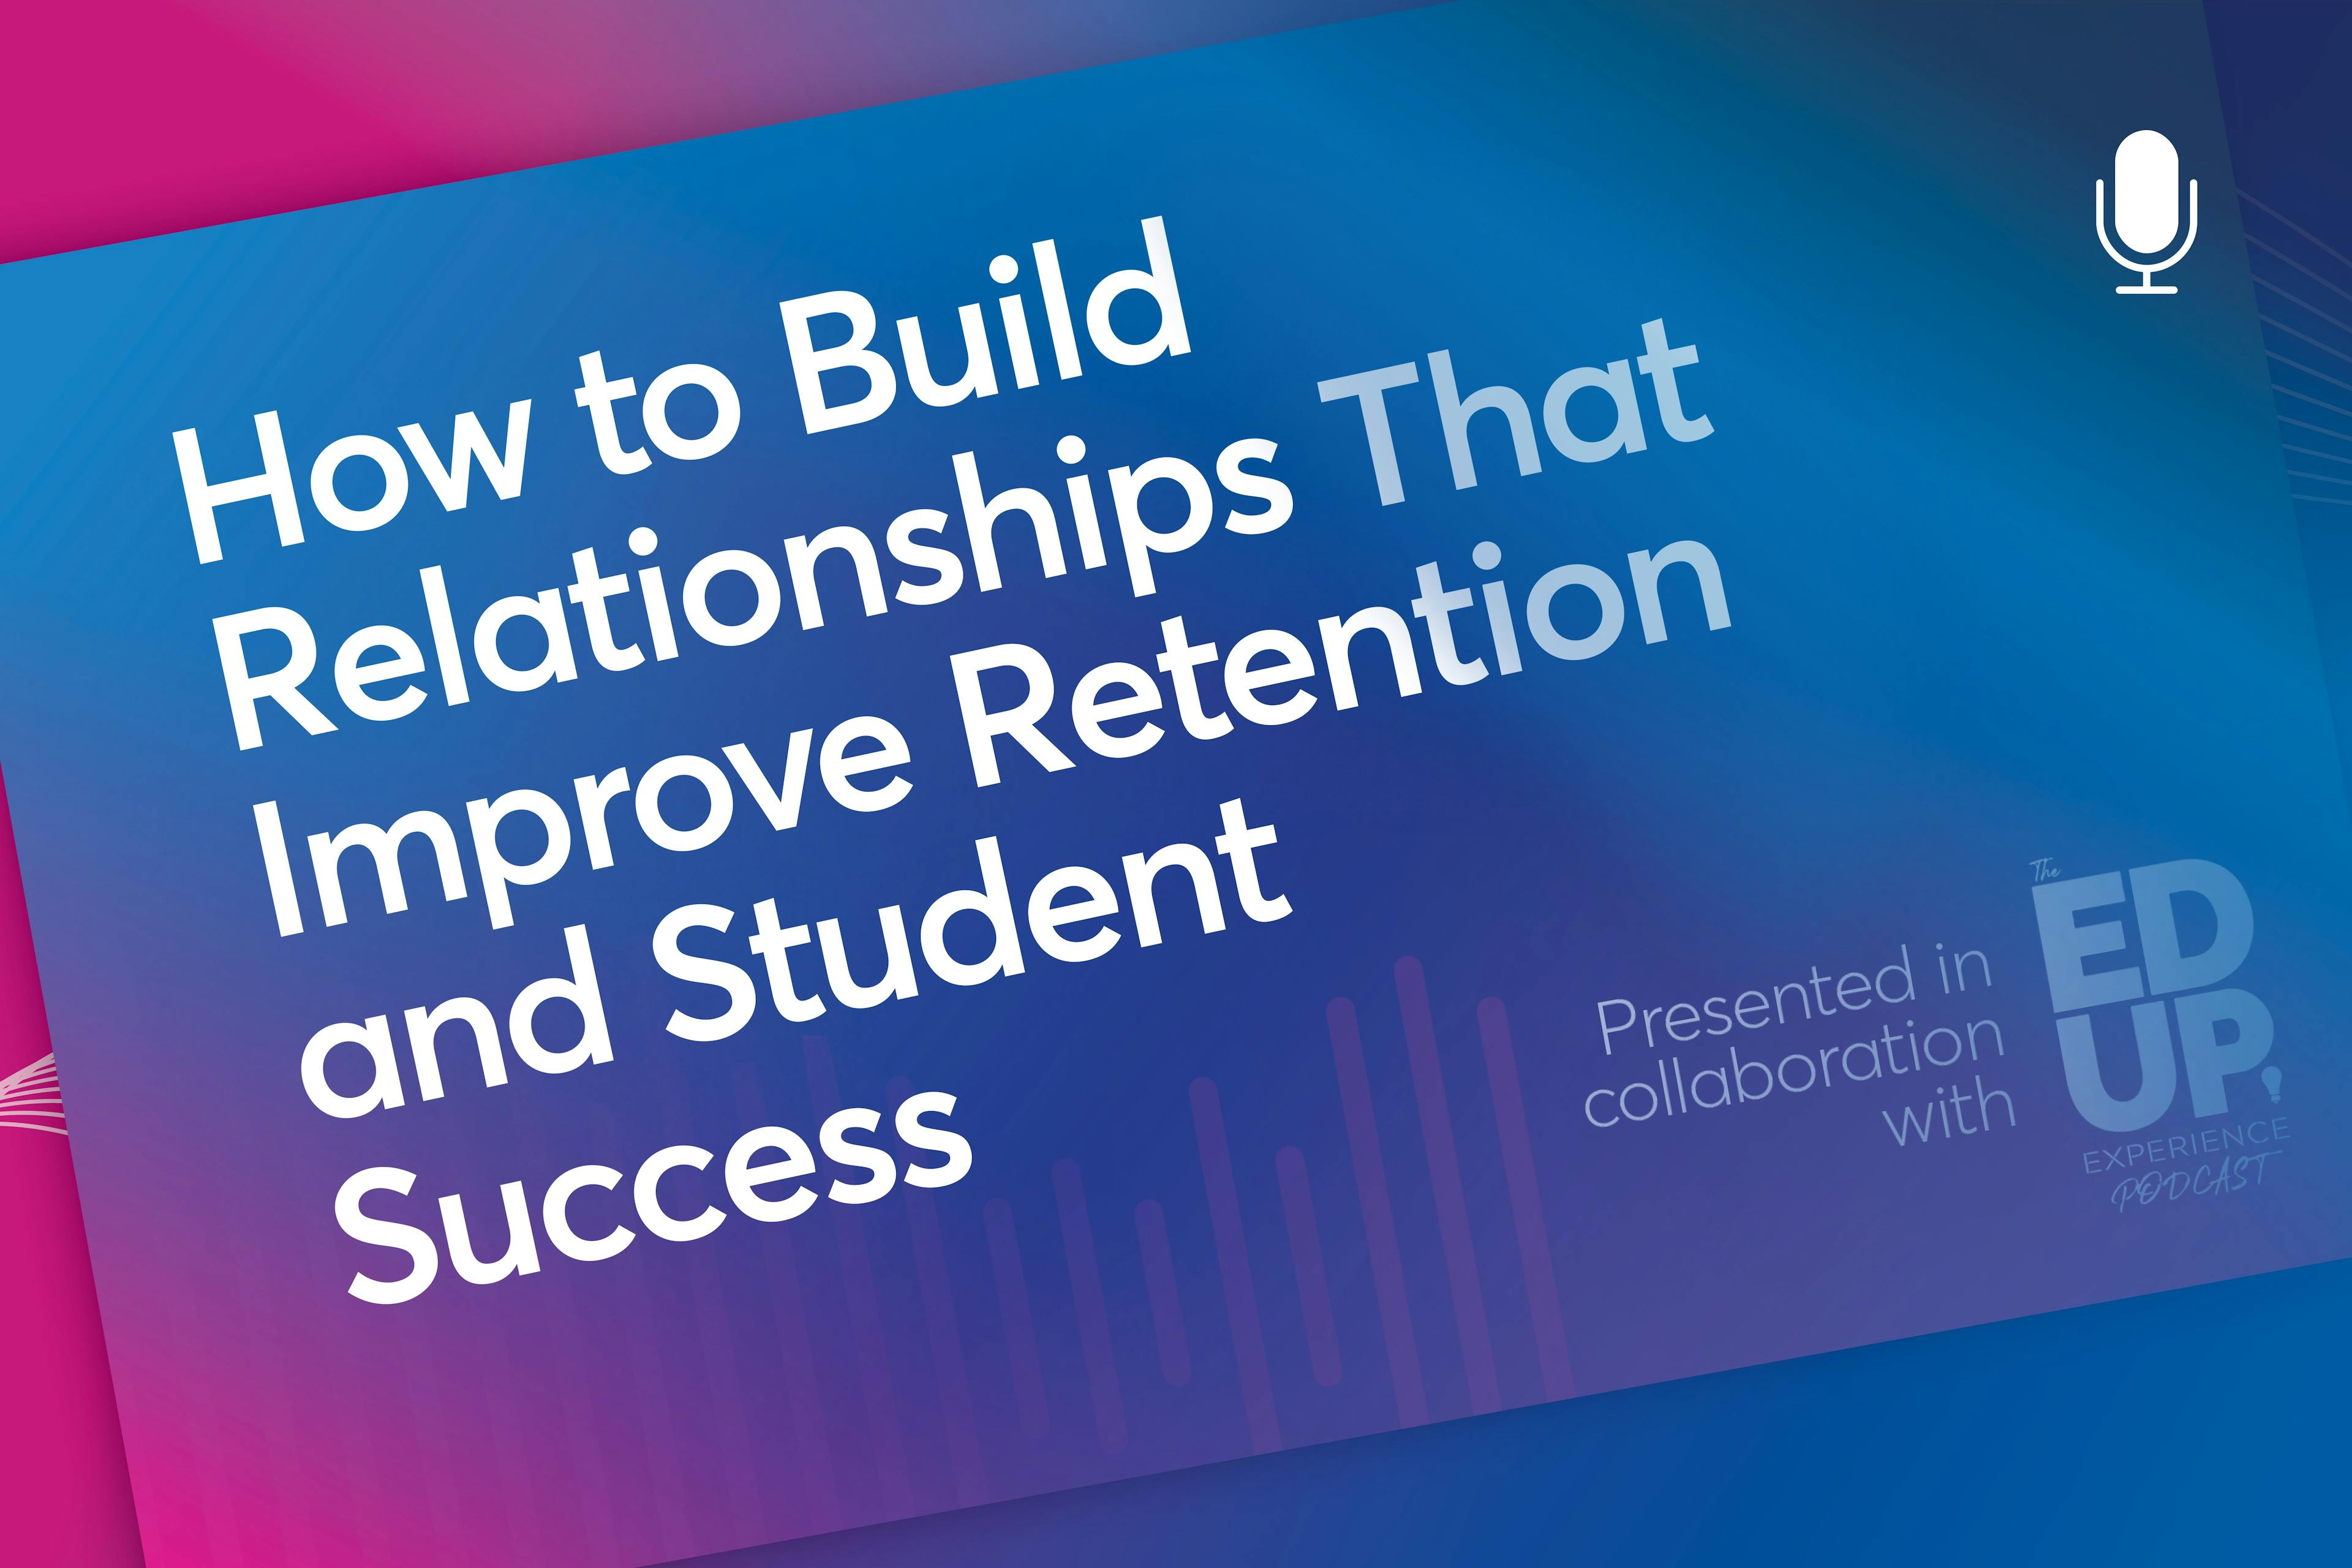 Podcast: How to Build Relationships That Improve Retention and Student Success